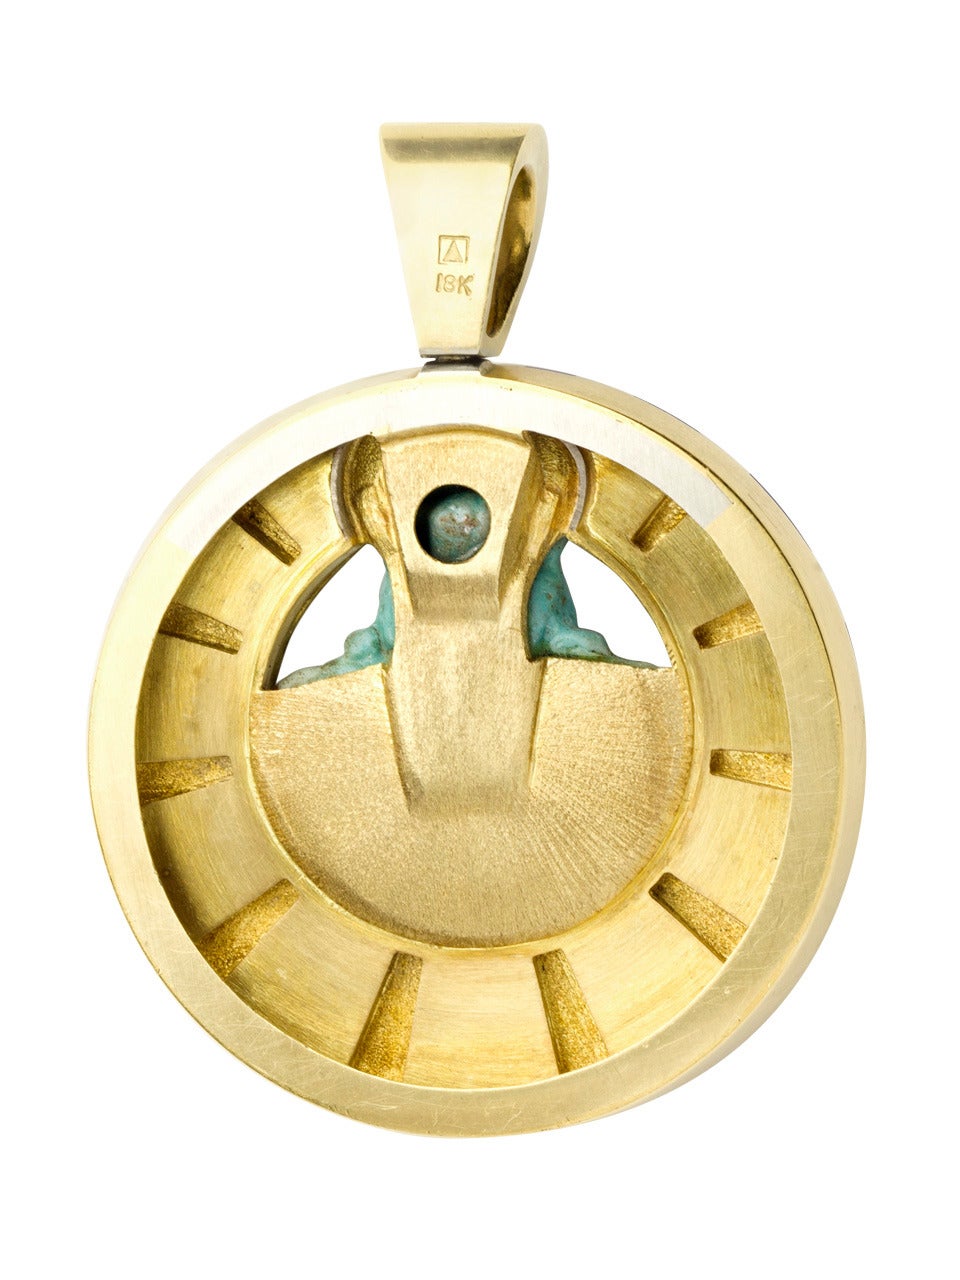 18kt gold pendant inlaid with lapis stripes, surrounding an antique Egyptian faience piece. Marked 18K and maker's mark.